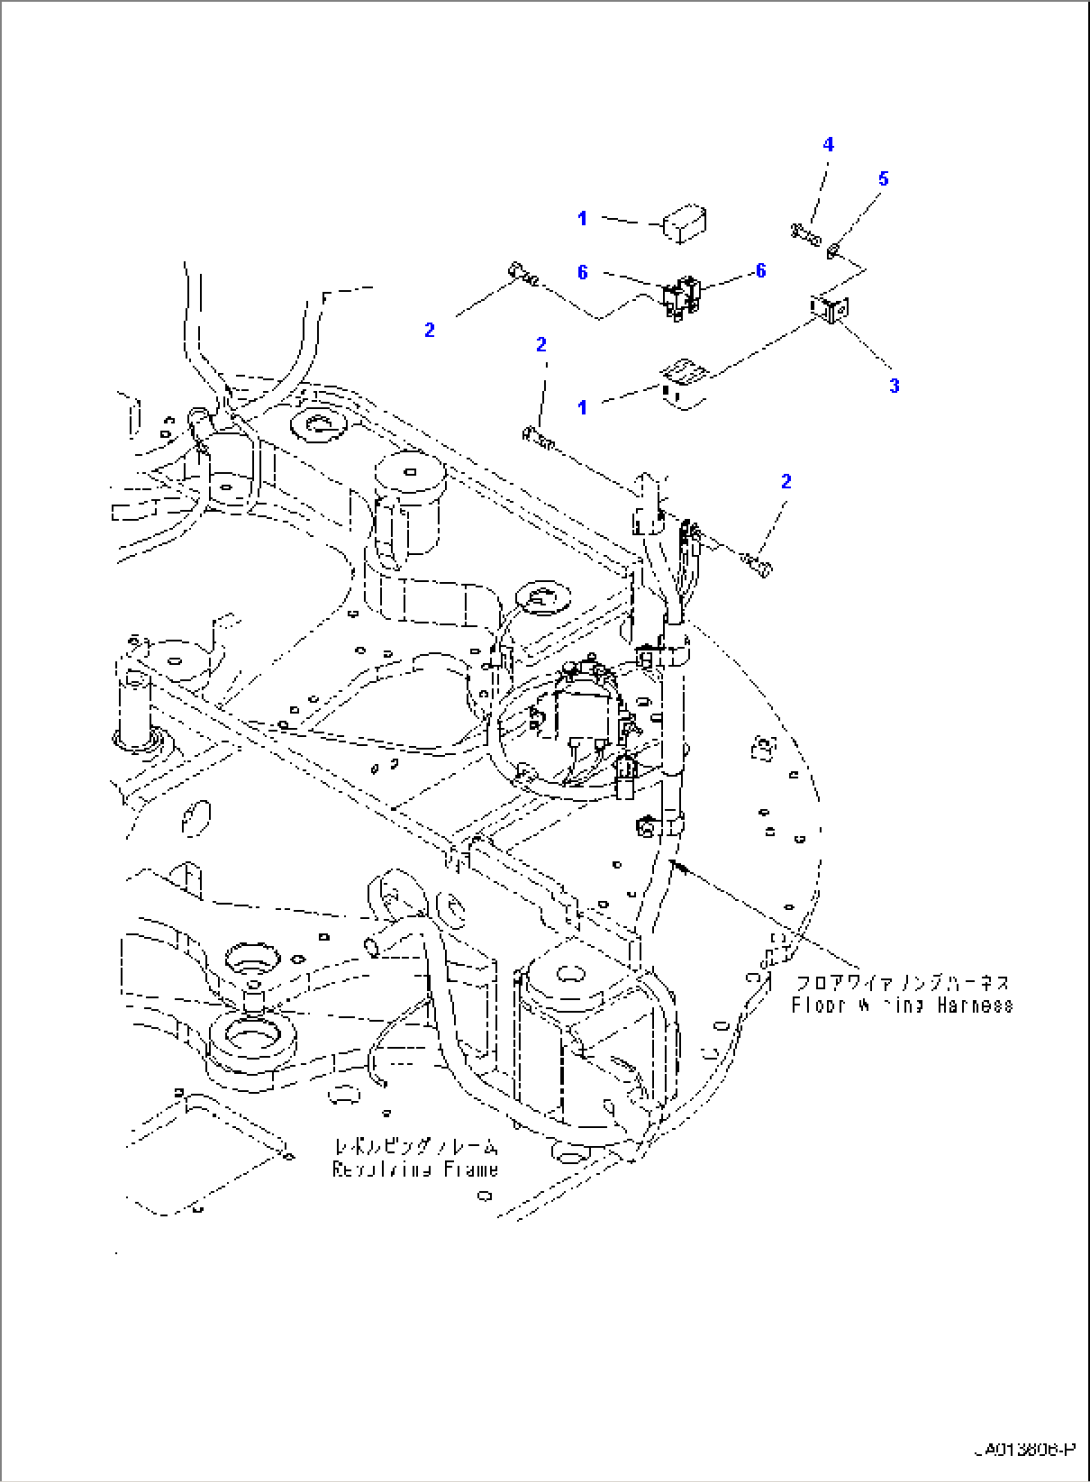 ELECTRIC WIRING HARNESS, FUSE HOLDER